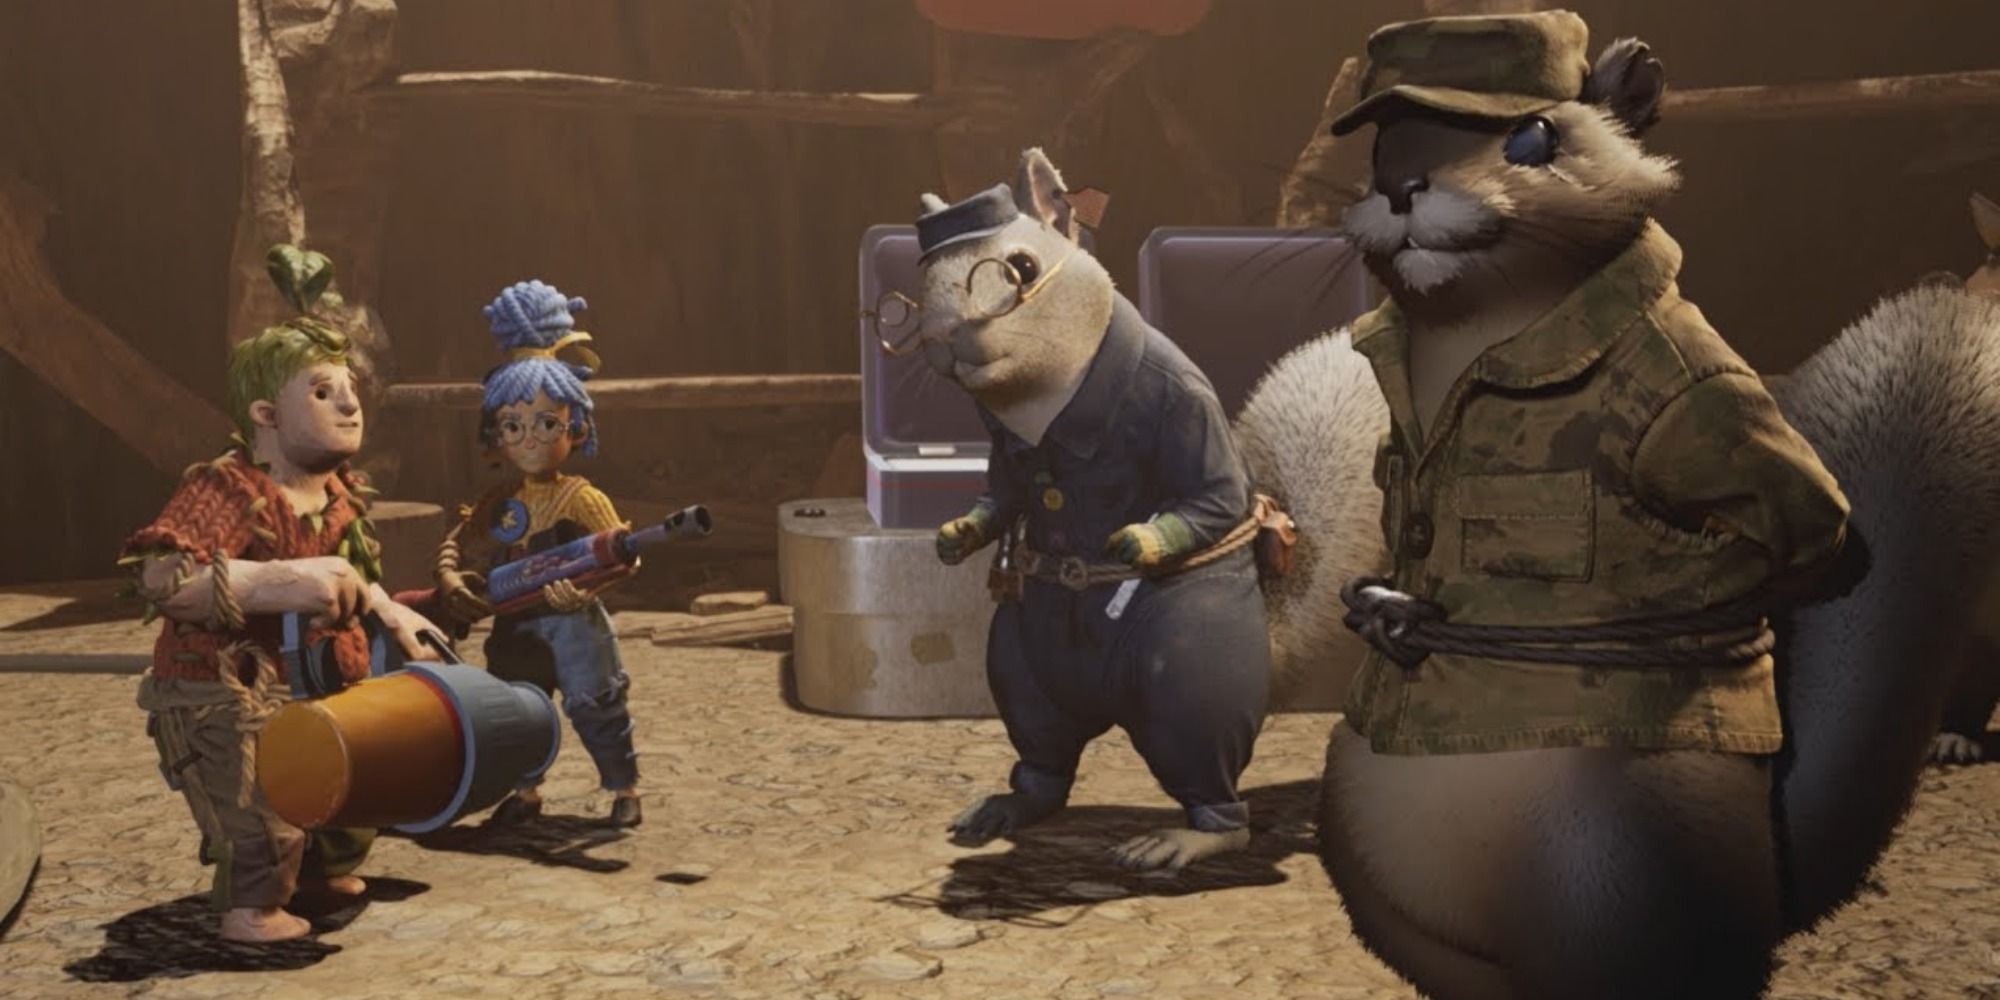 Cody and May talk to two humanoid squirrels wearing military clothes